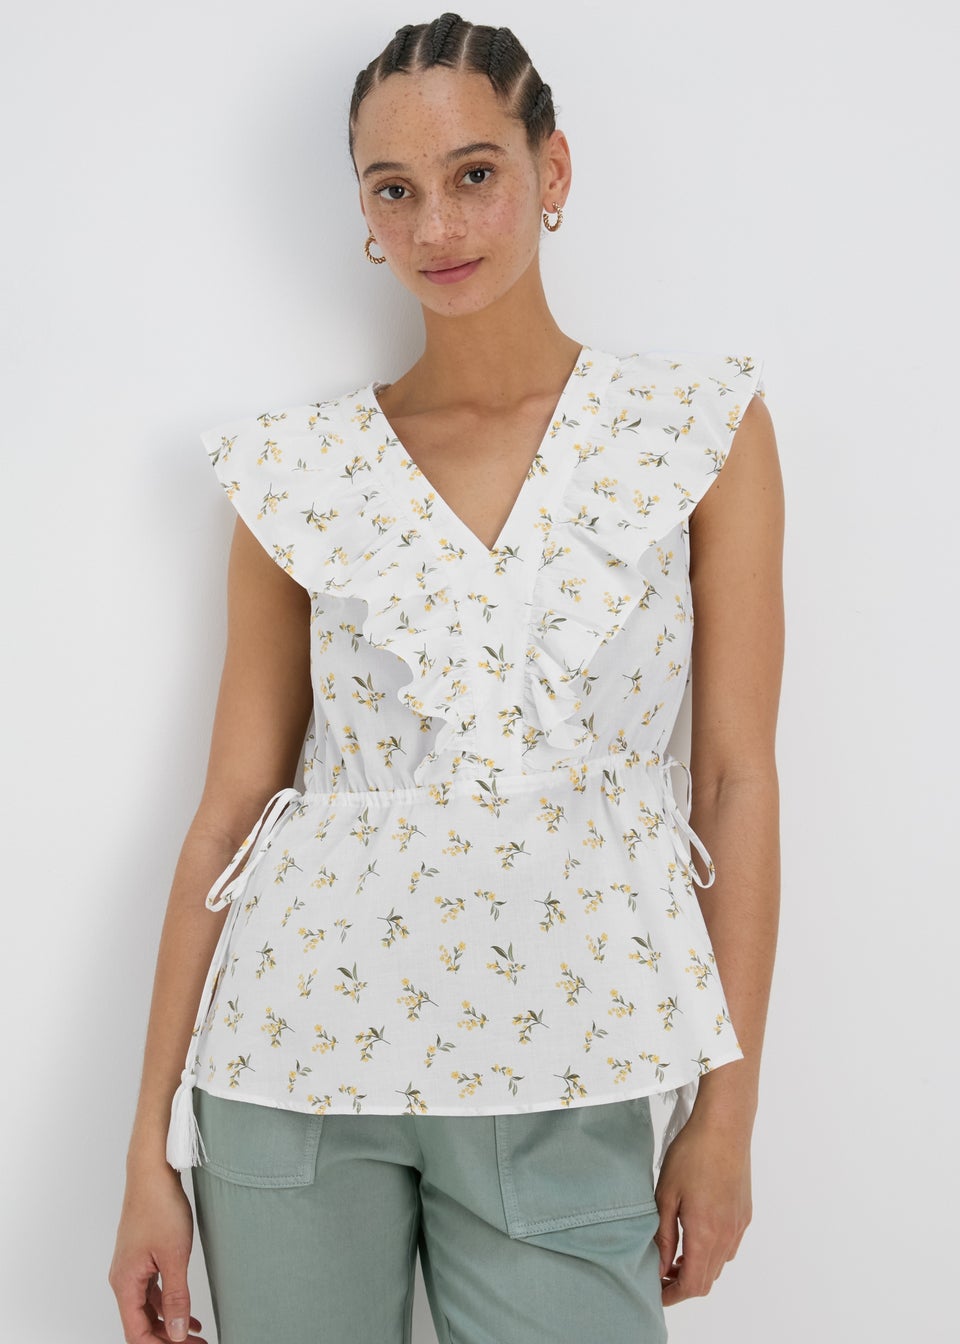 White Floral Print Ruffled Sides Blouse Top